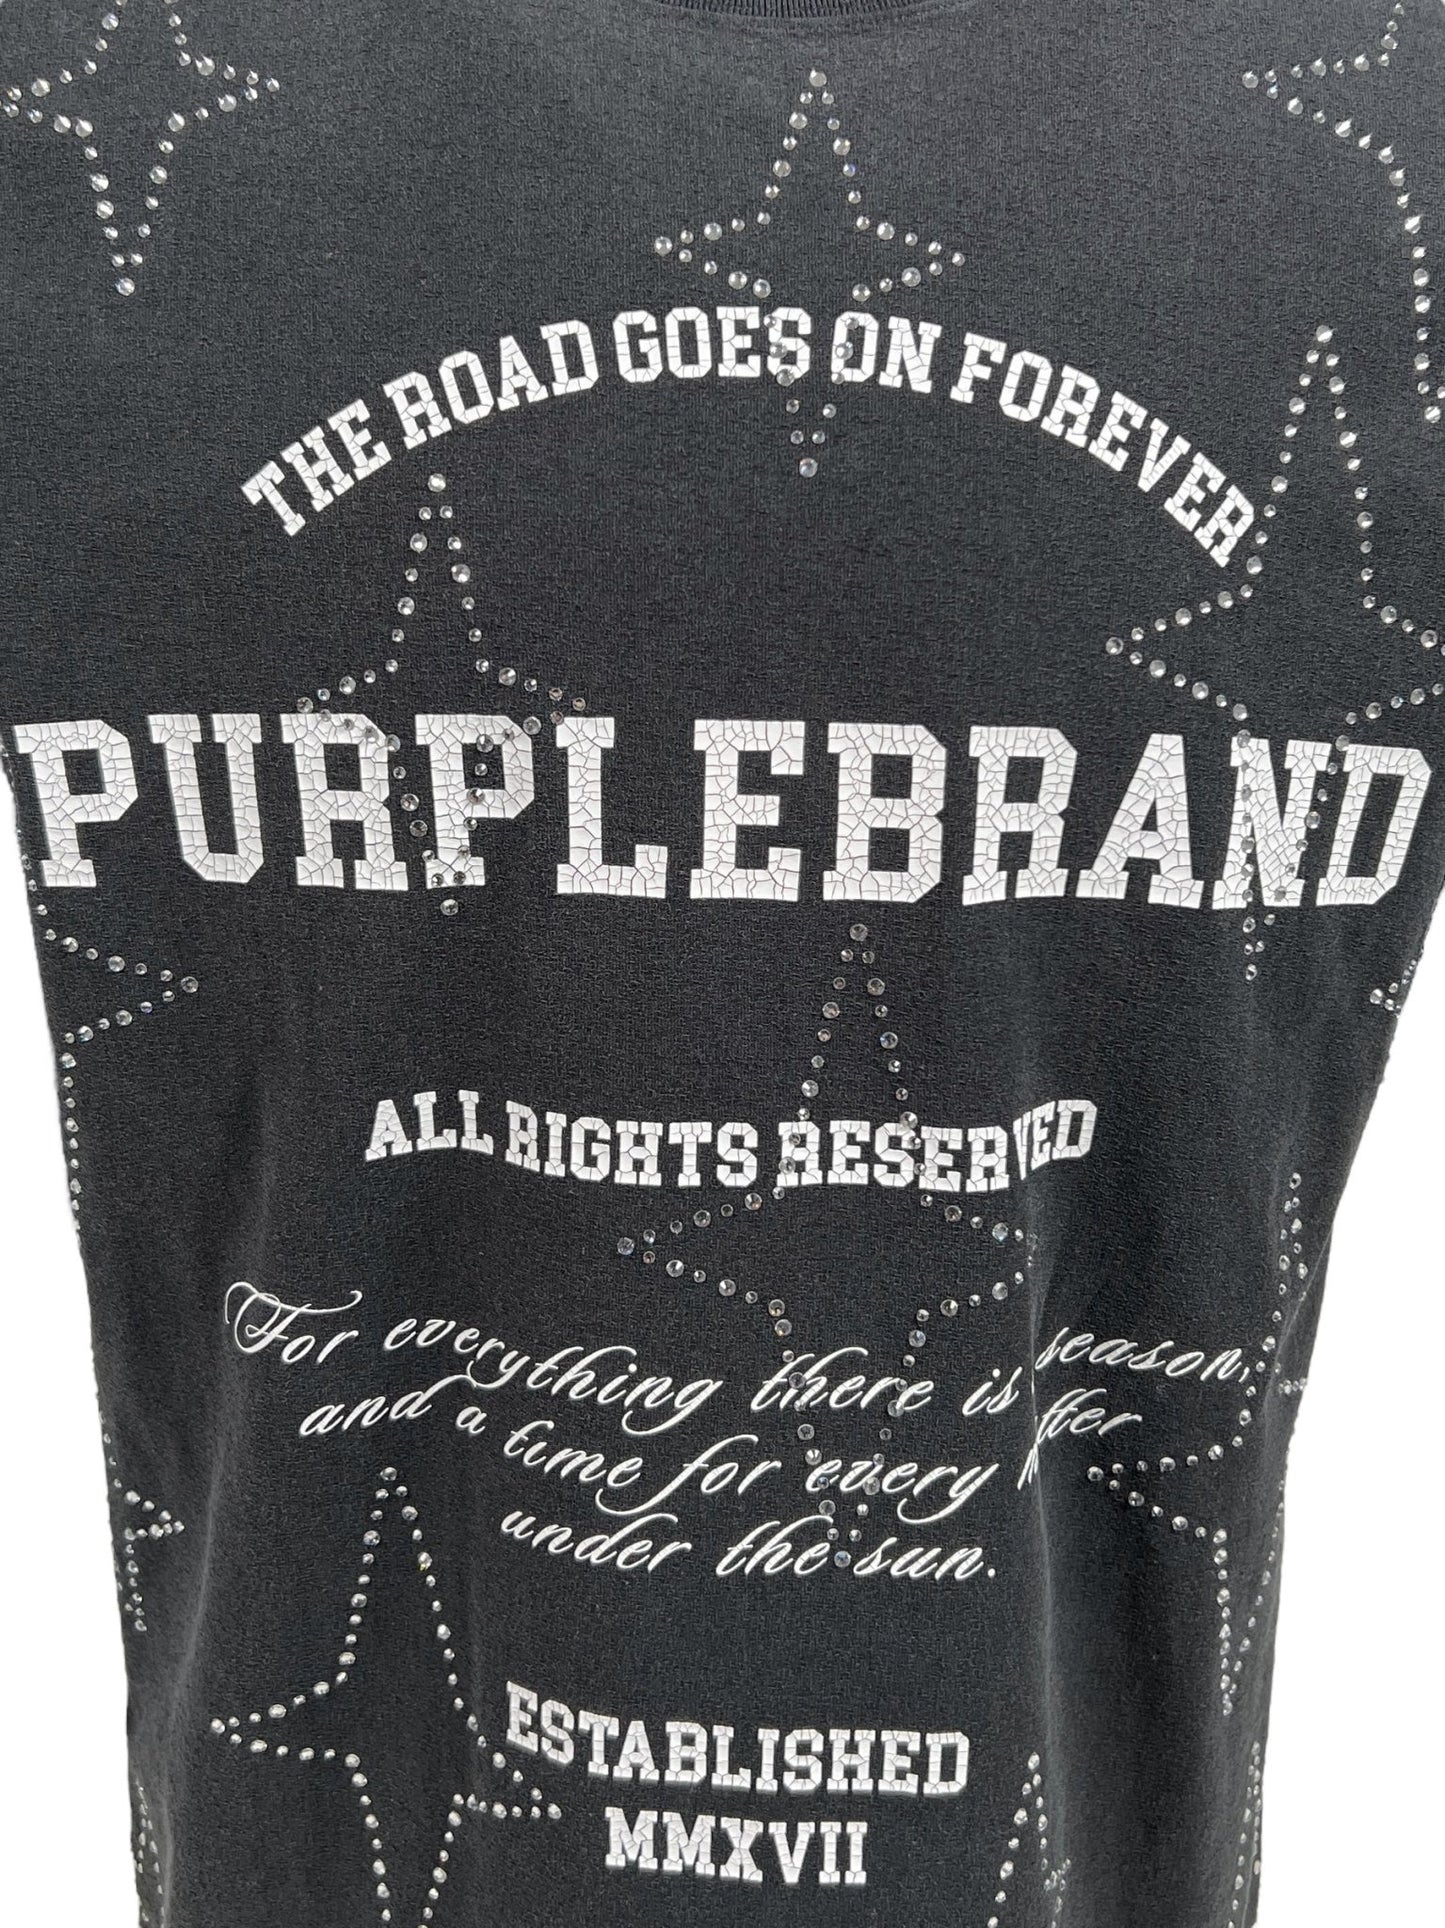 Black cotton graphic tee with white text and crystal stars, reading: "The road goes on forever," "Purple Brand," "All rights reserved," "For everything there is a season; and a time for every matter under the sun," "Established MMXVII.

PURPLE BRAND P104-JSCB TEXTURED JERSEY TEE BLACK
Brand Name: PURPLE BRAND